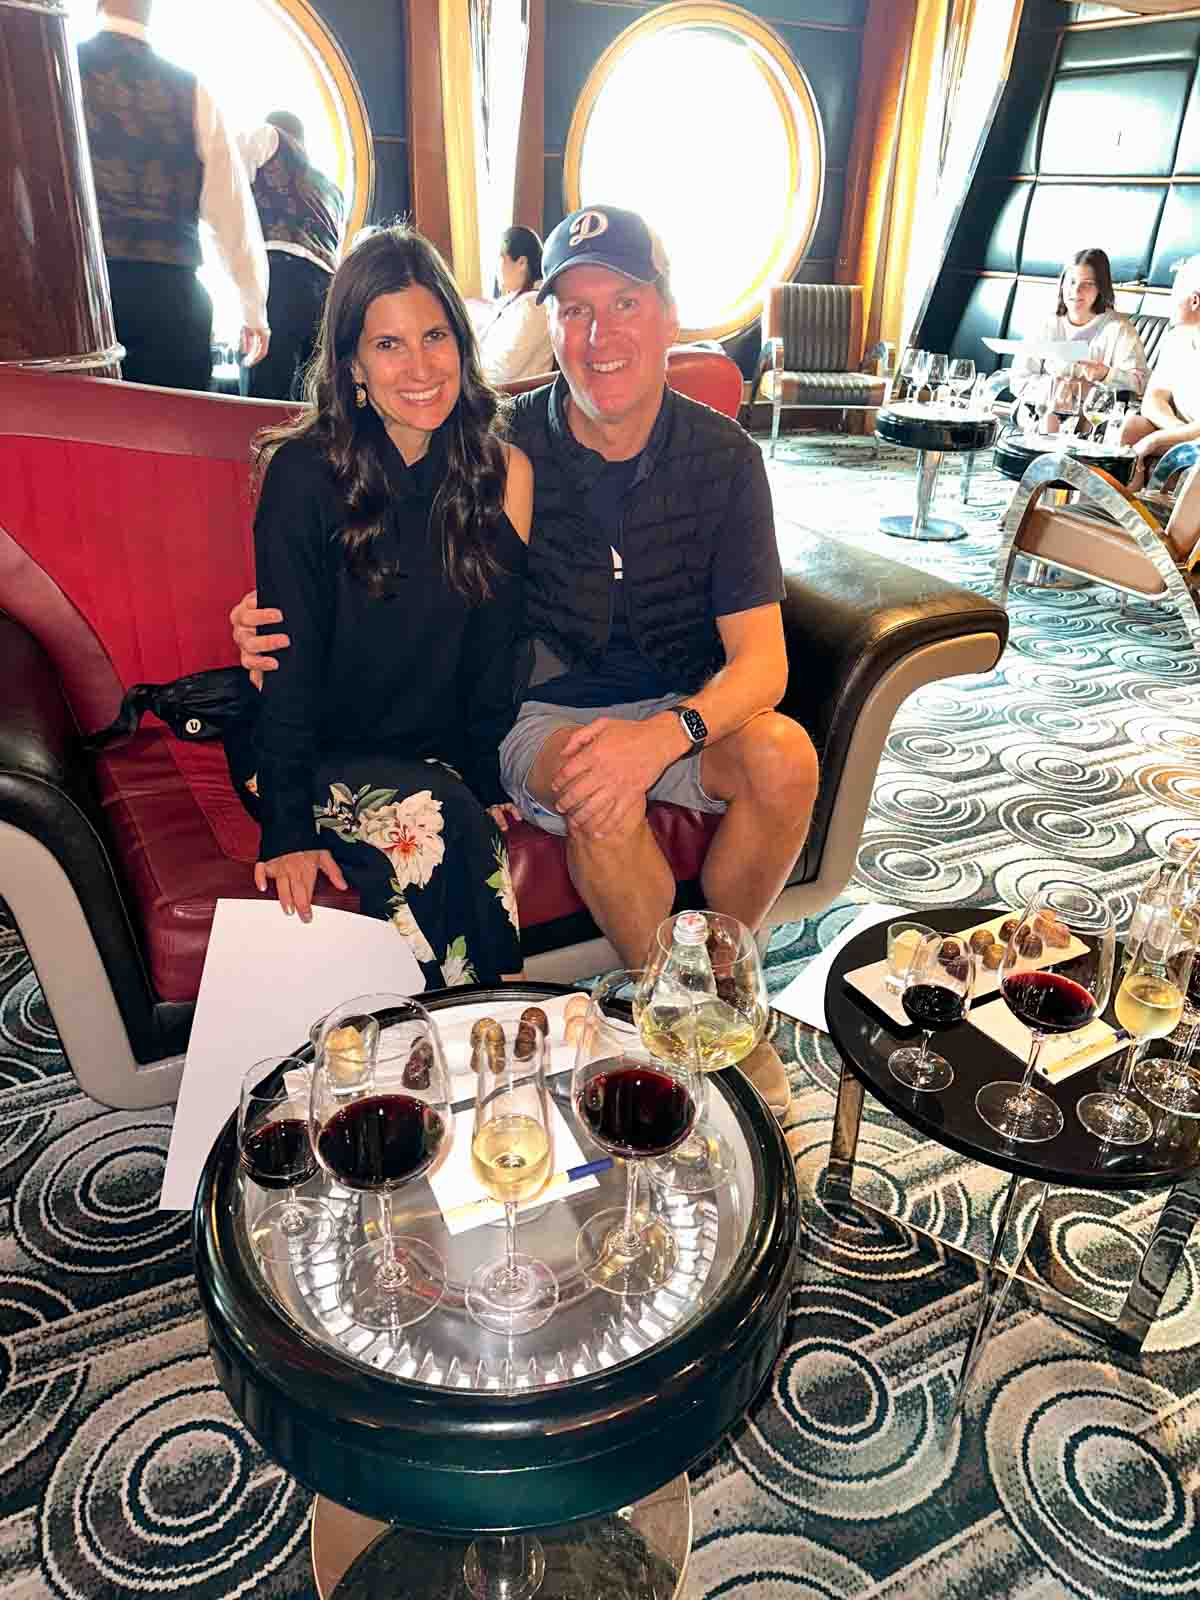 A couple sitting on a red couch in front of two low tables with lined up wine glasses and chocolates on them.